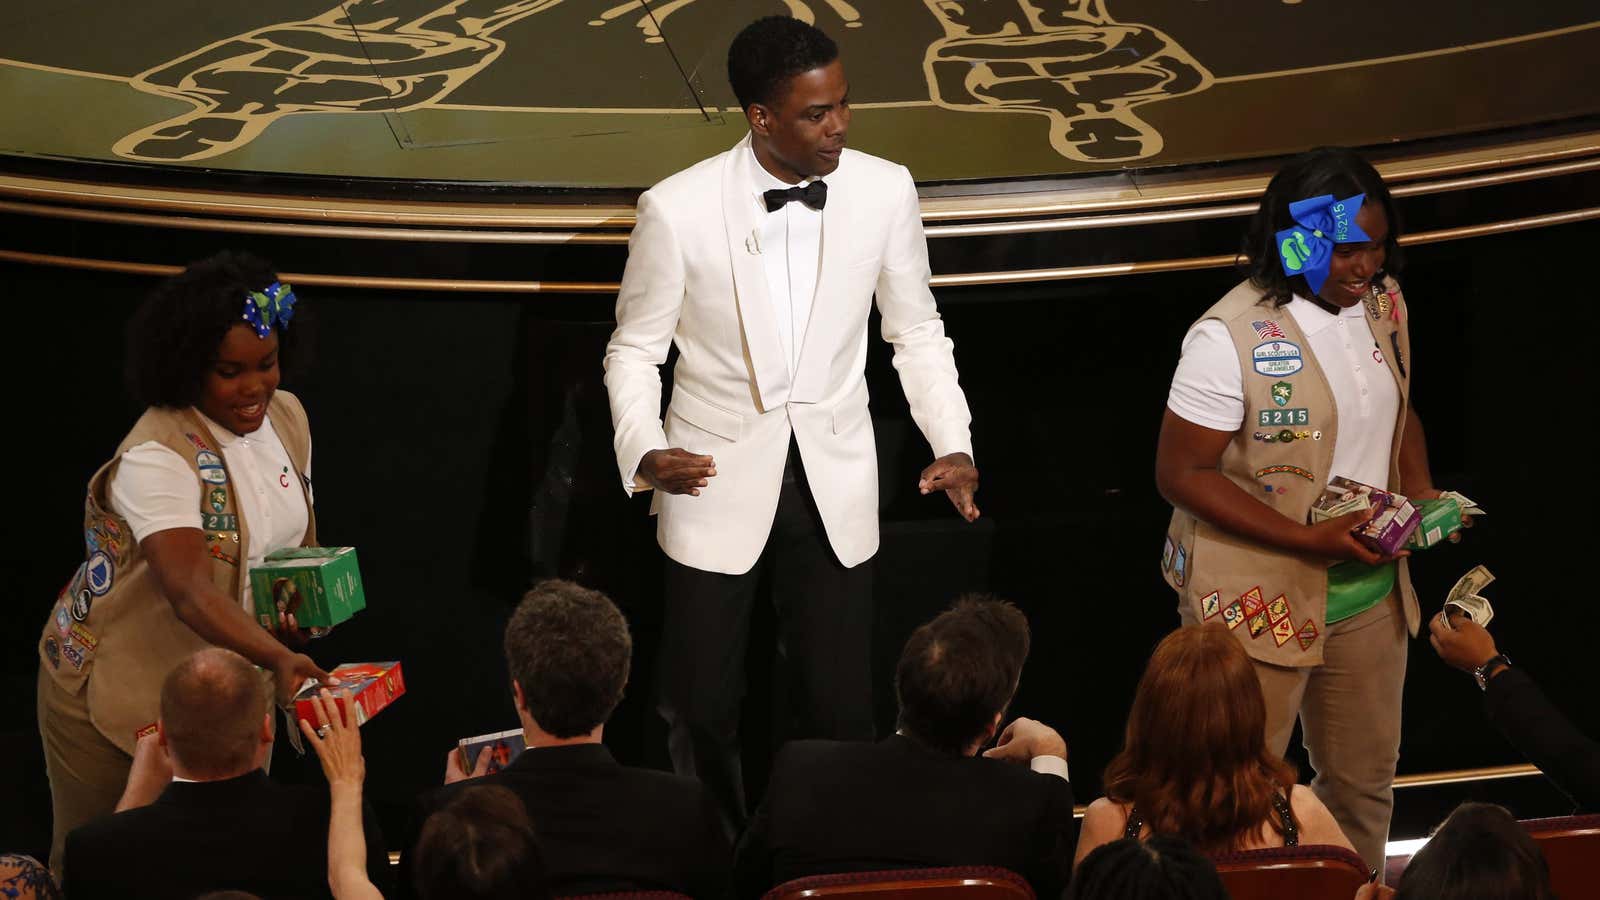 Remember that time that Girl Scouts sold cookies at the Oscars?